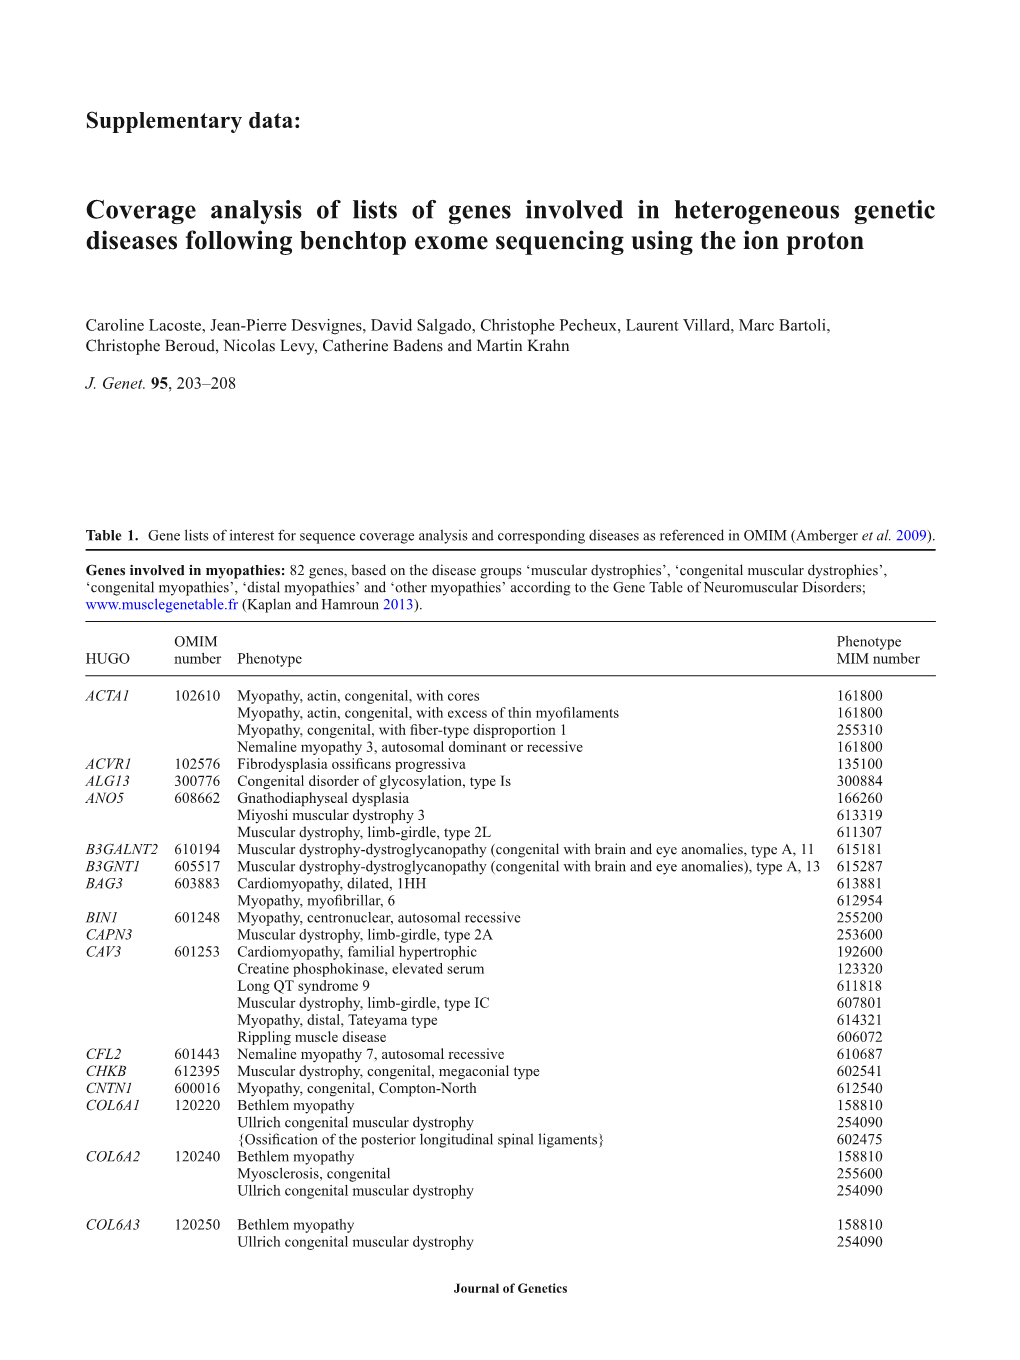 Coverage Analysis of Lists of Genes Involved in Heterogeneous Genetic Diseases Following Benchtop Exome Sequencing Using the Ion Proton